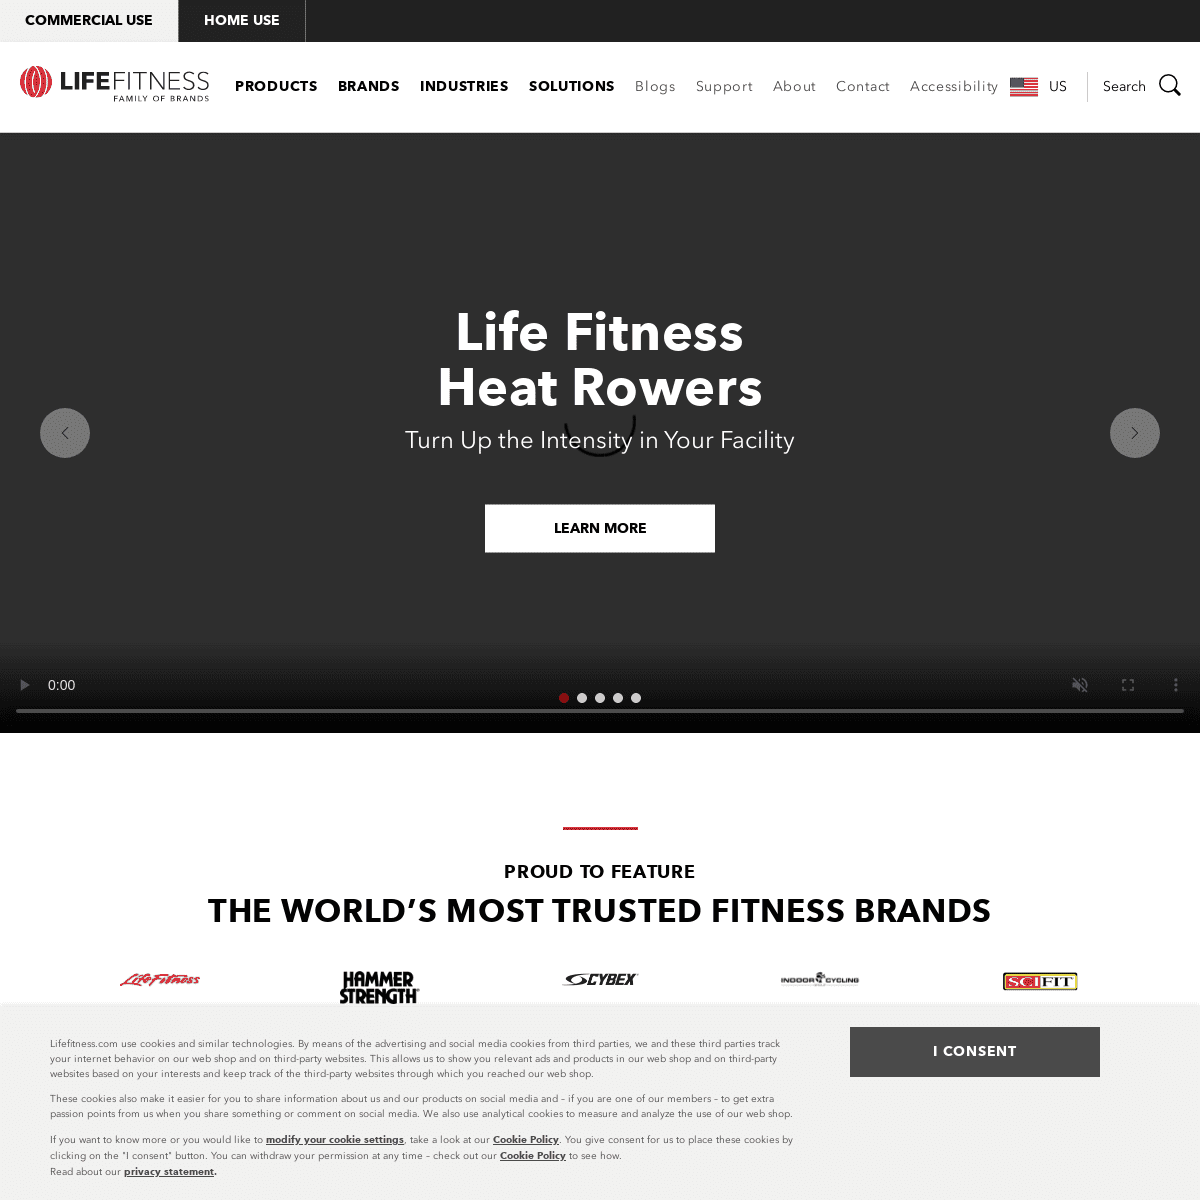 A complete backup of https://lifefitness.com